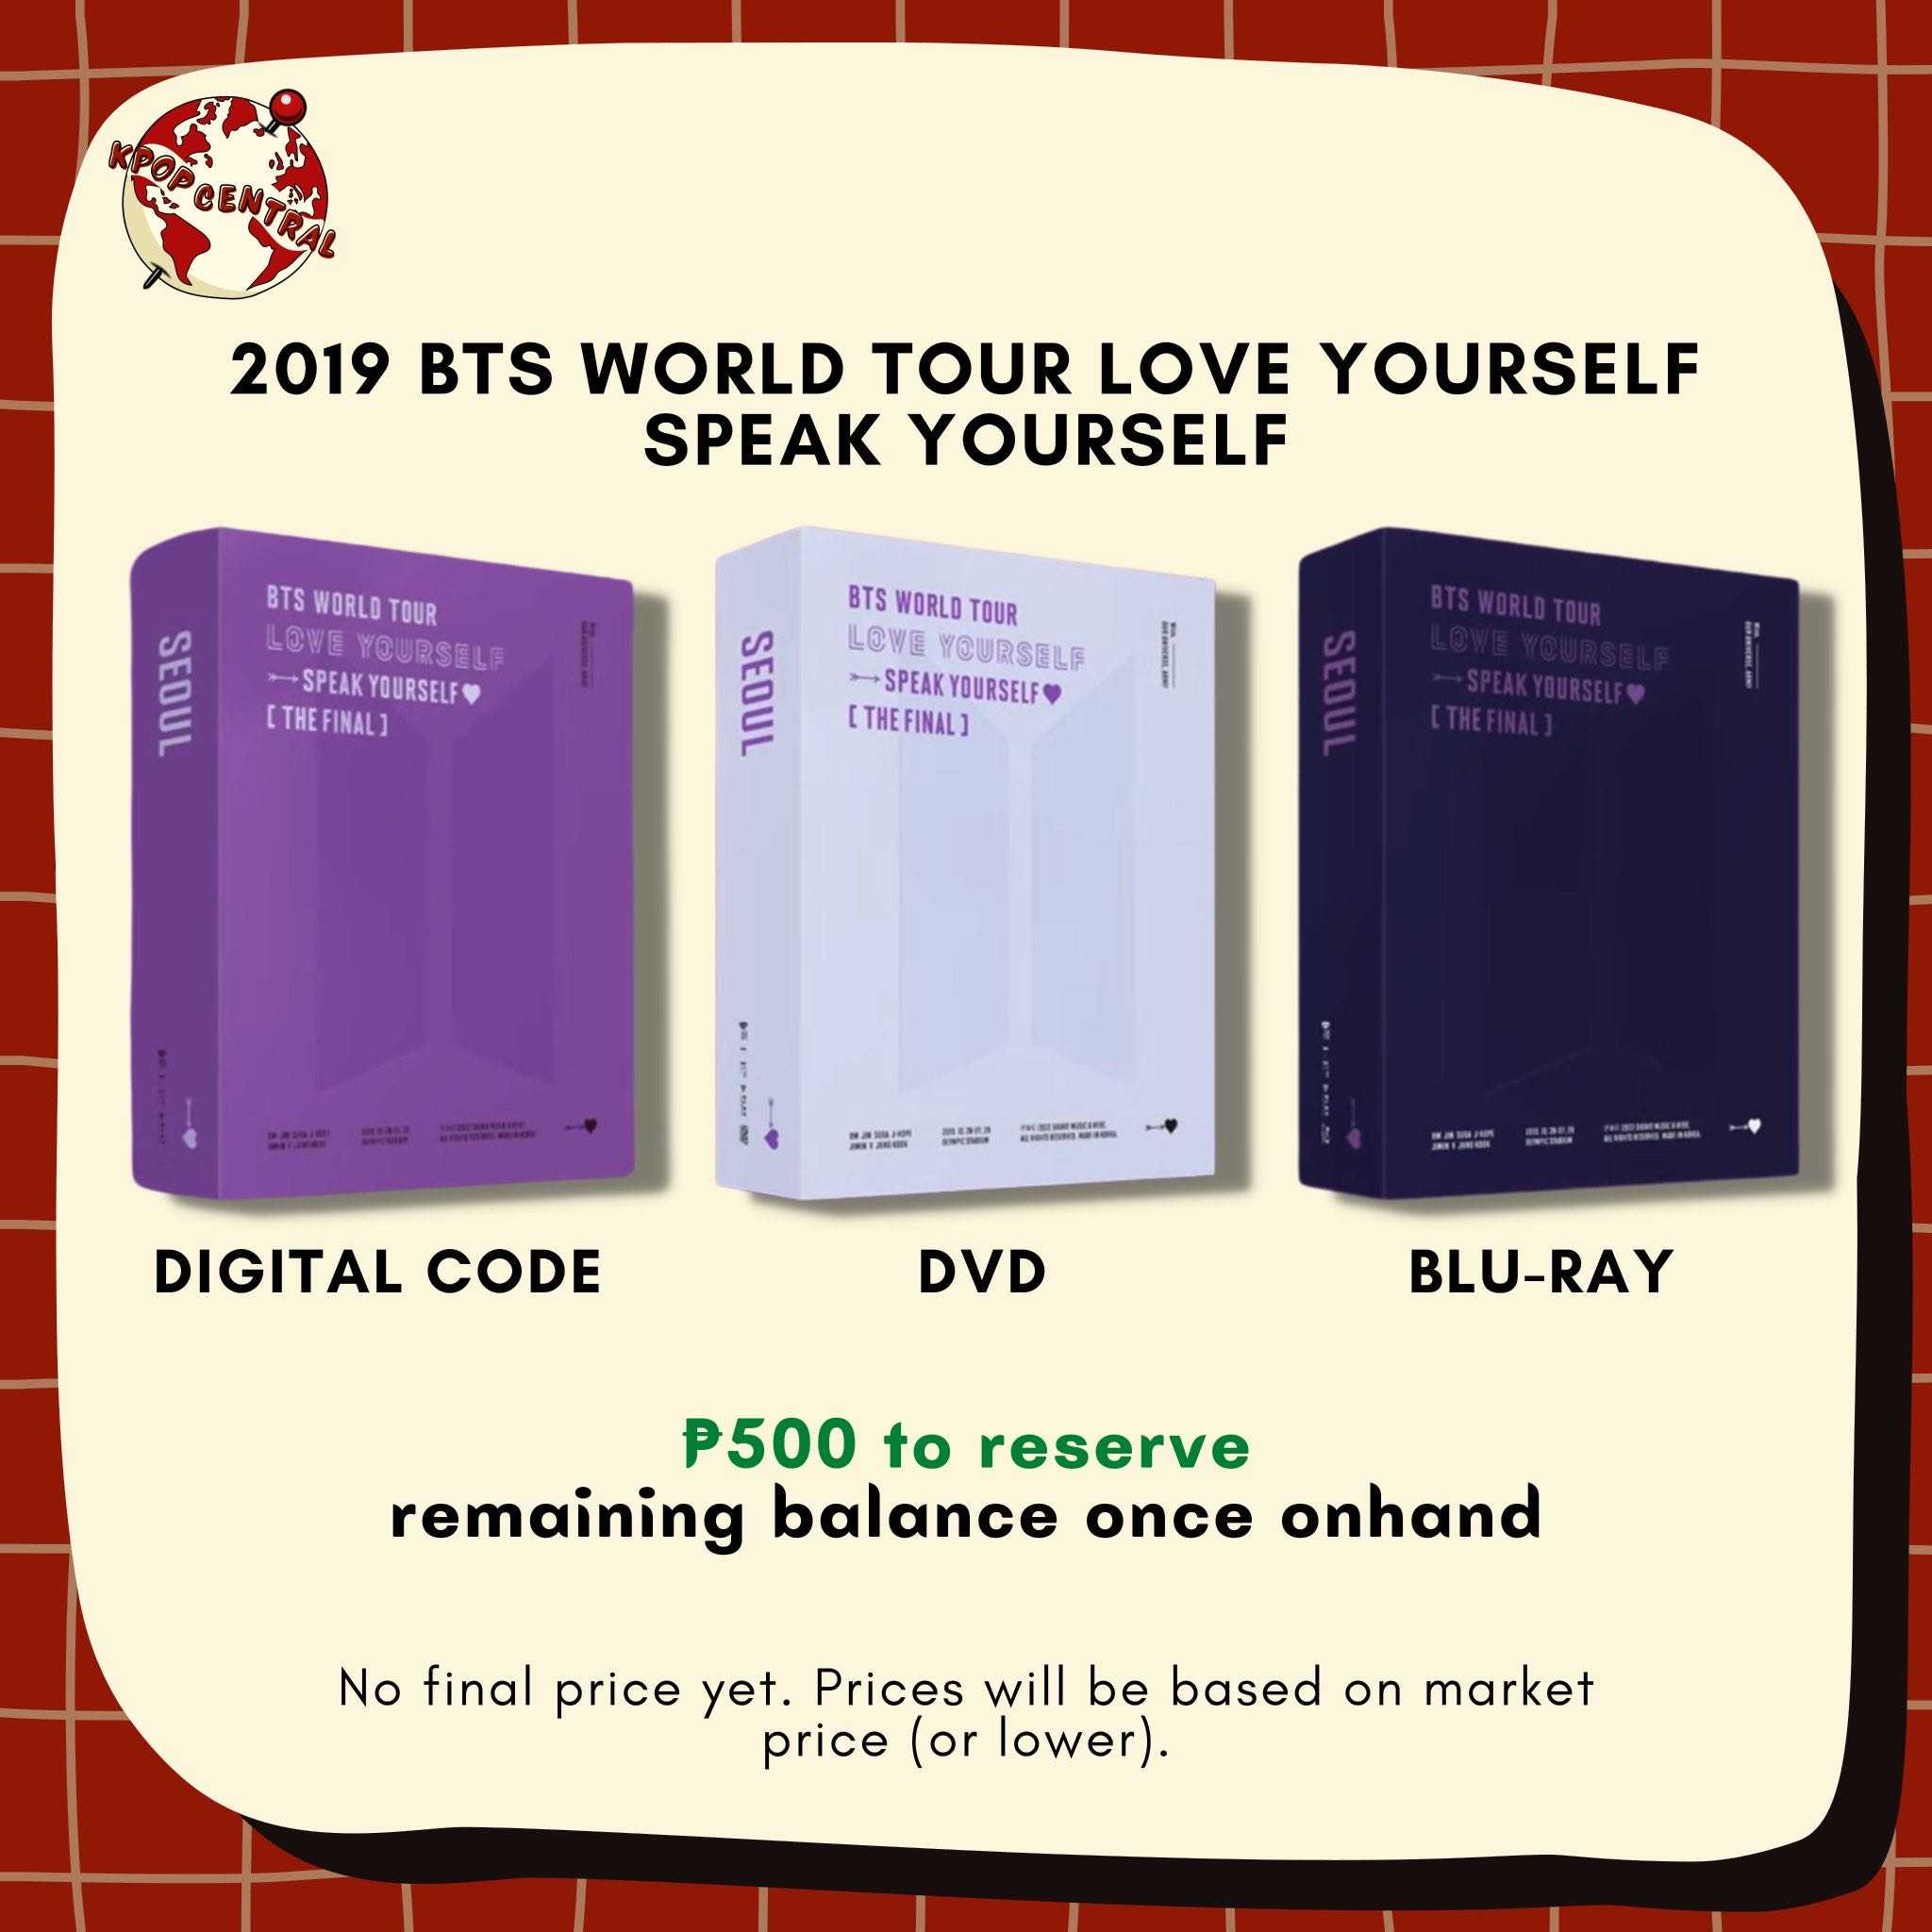 2019 BTS WORLD TOUR LOVE YOURSELF SPEAK YOURSELF: THE FINAL